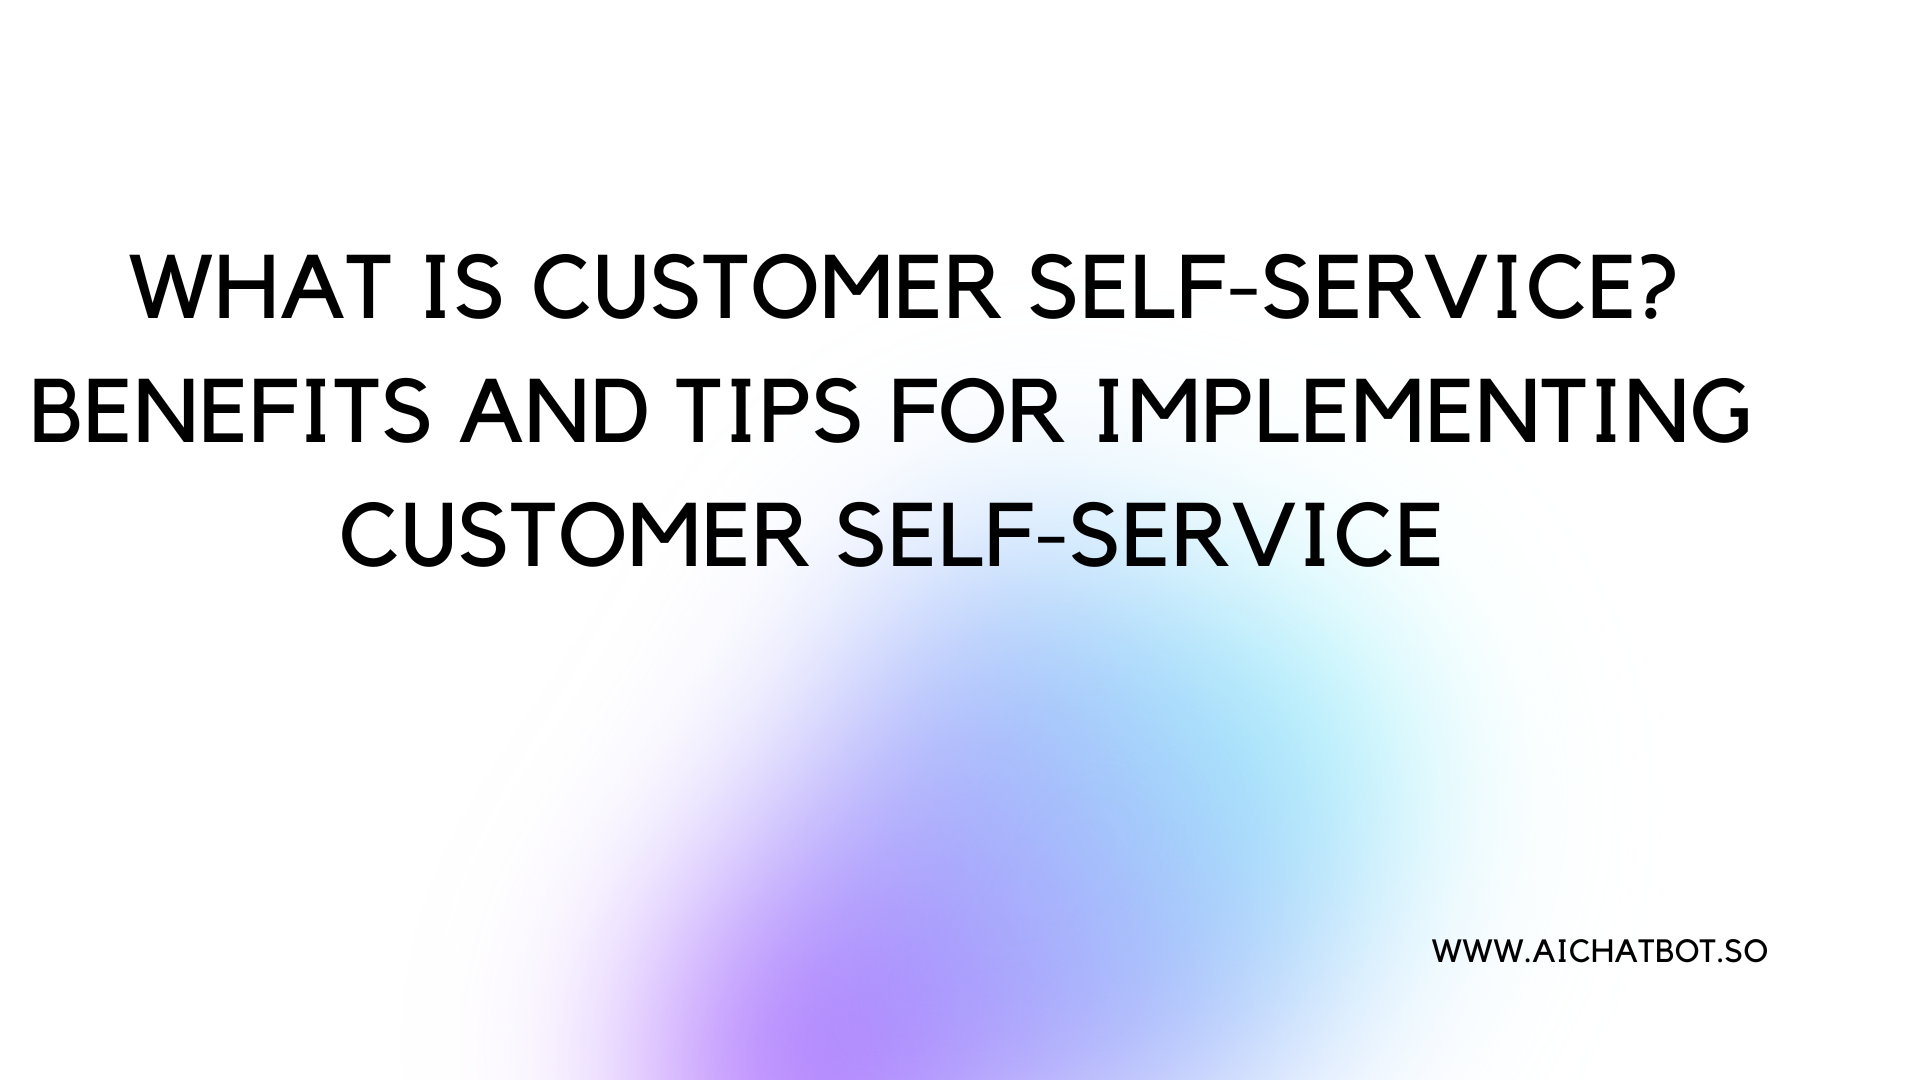 What Is Customer Self-Service? Benefits and Tips for Implementing Customer Self-Service